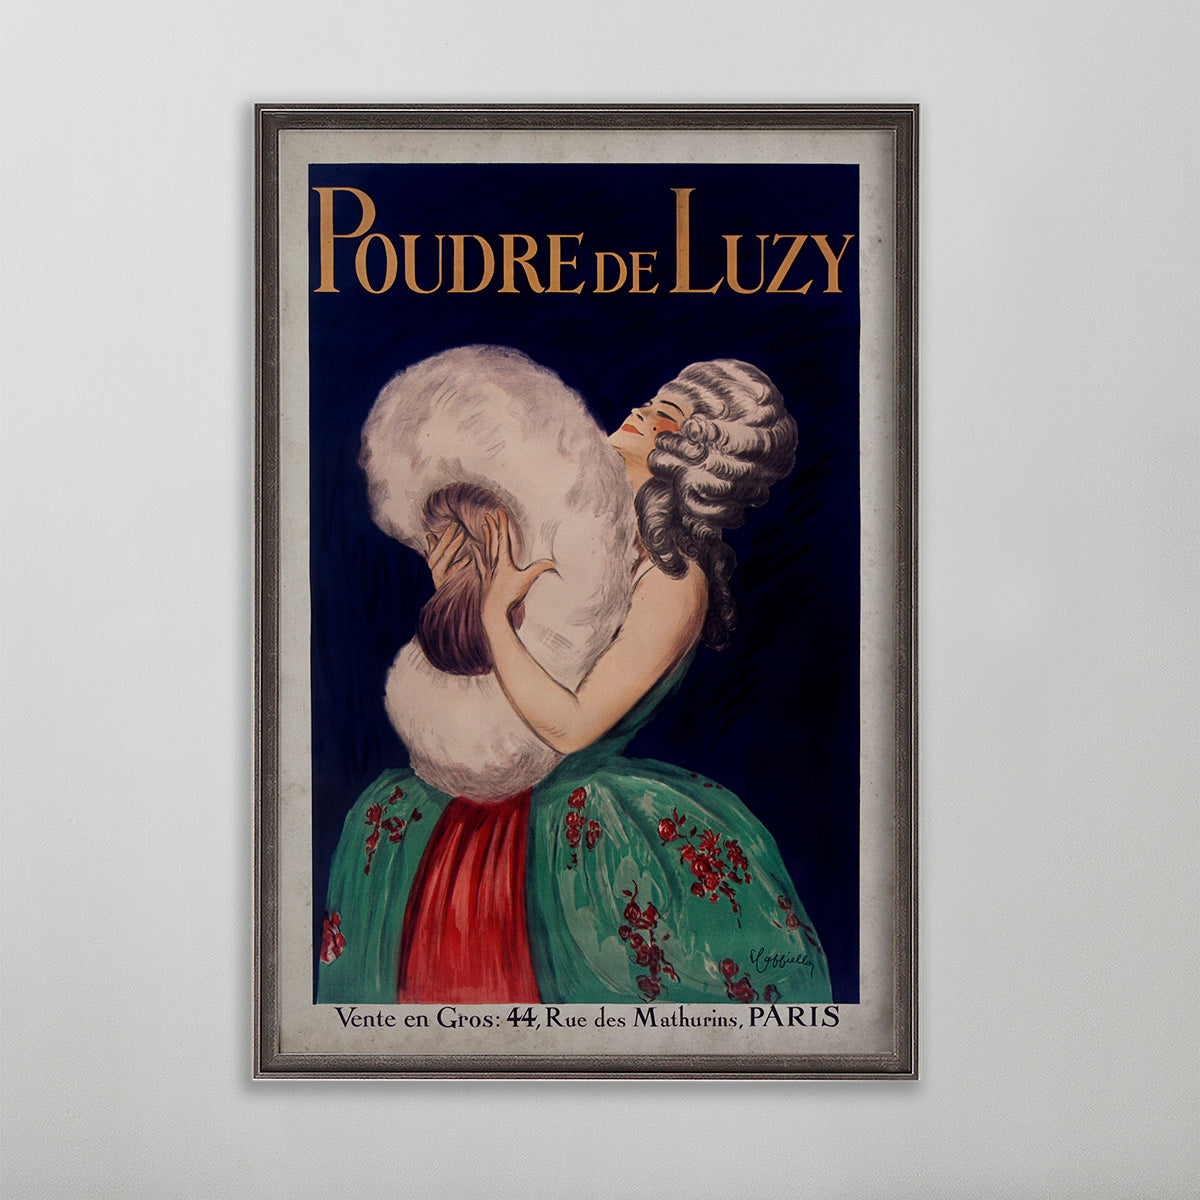 Poudre De Luzy vintage poster wall art by leonetto cappiello. Woman with wig holding powder pad.